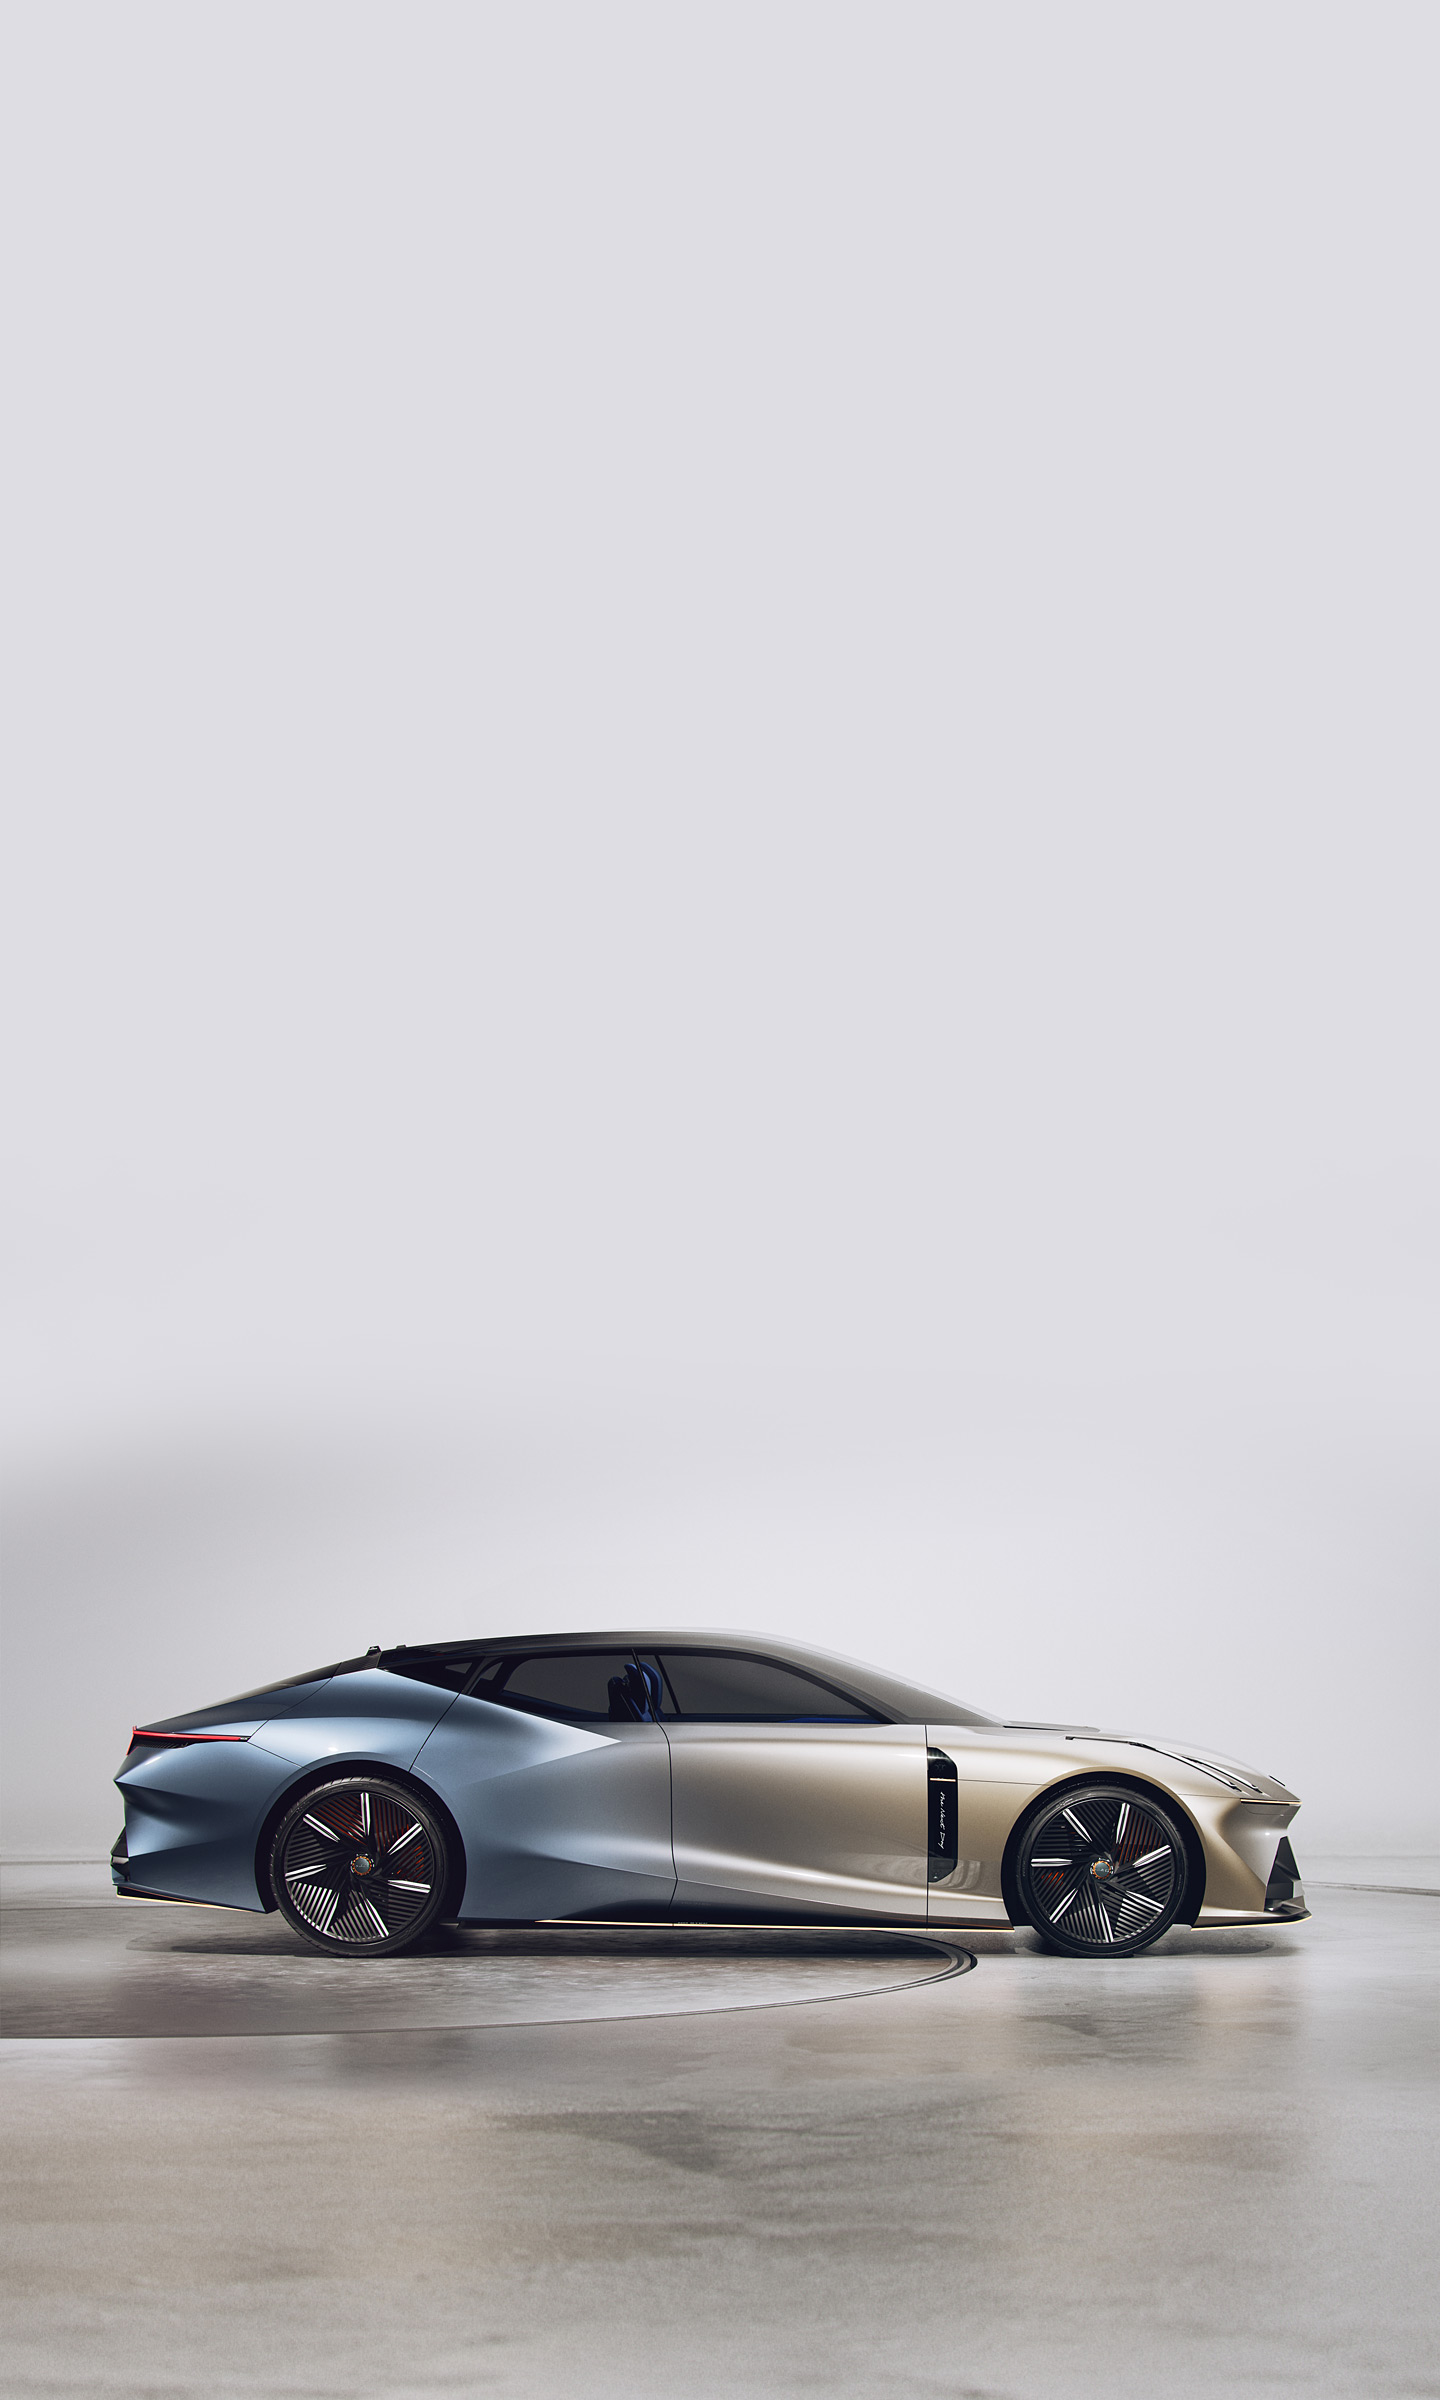  2022 Lynk Co The Next Day Concept Wallpaper.